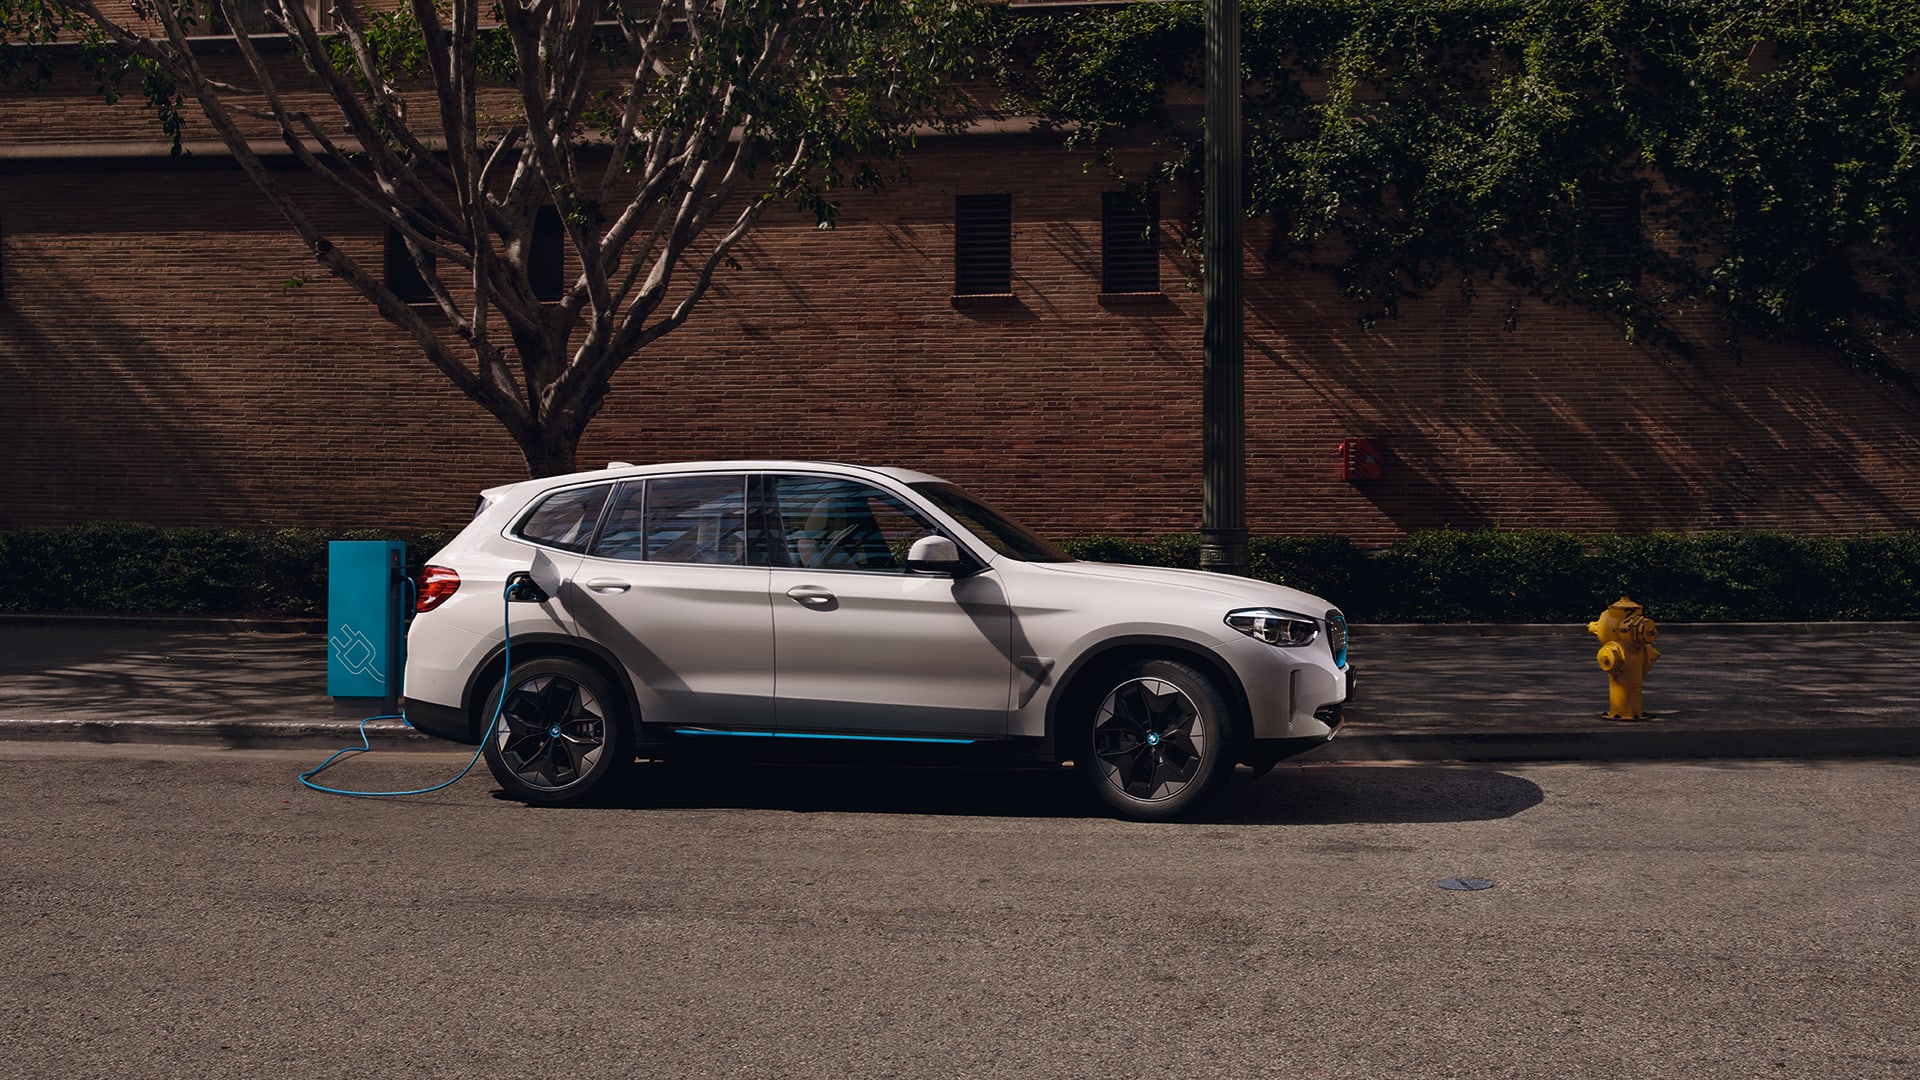 OWN THE FULLY ELECTRIC BMW iX3 